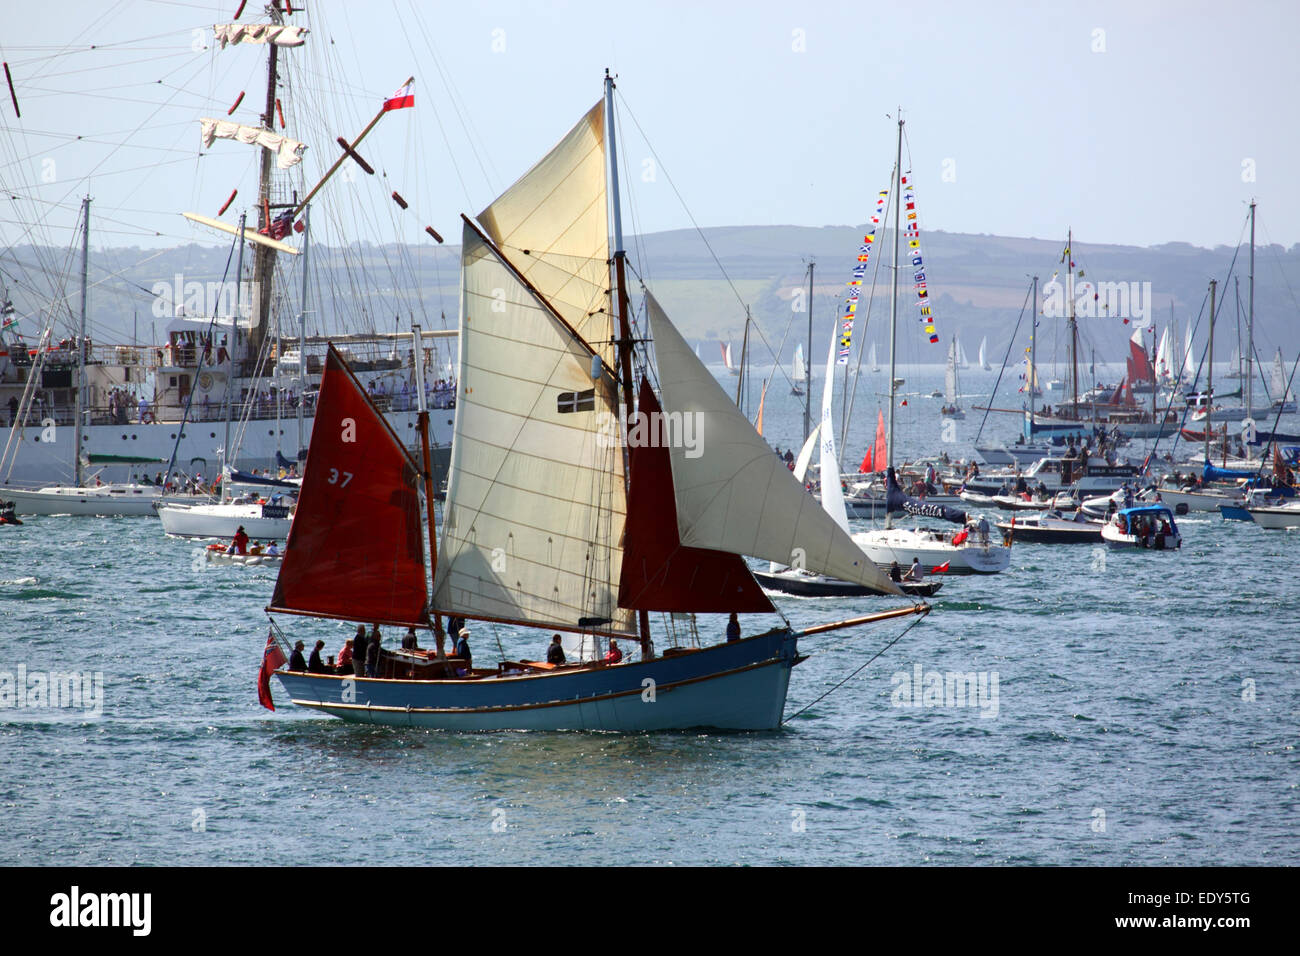 A gaff-rigged yawl witha Cornish flag amid a crowd of other boats. Stock Photo